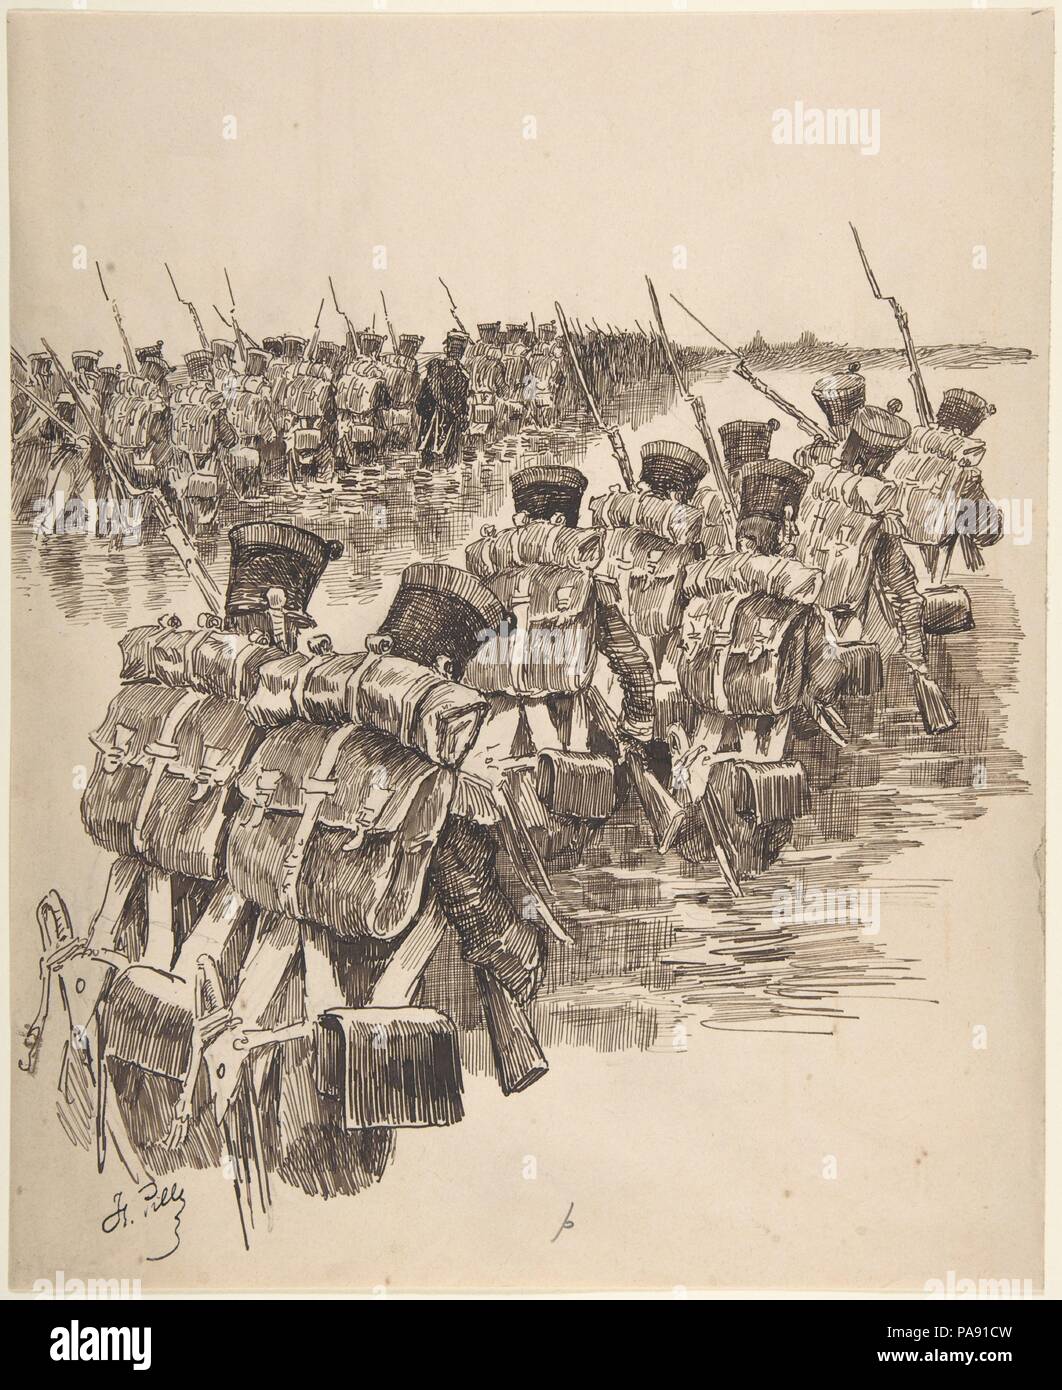 Soldiers Marching in Water. Artist: Charles-Henri Pille (French, Essones 1844-1897 Paris). Dimensions: 10 3/4 x 8 3/4 in.  (27.3 x 22.2 cm). Date: 19th century. Museum: Metropolitan Museum of Art, New York, USA. Stock Photo